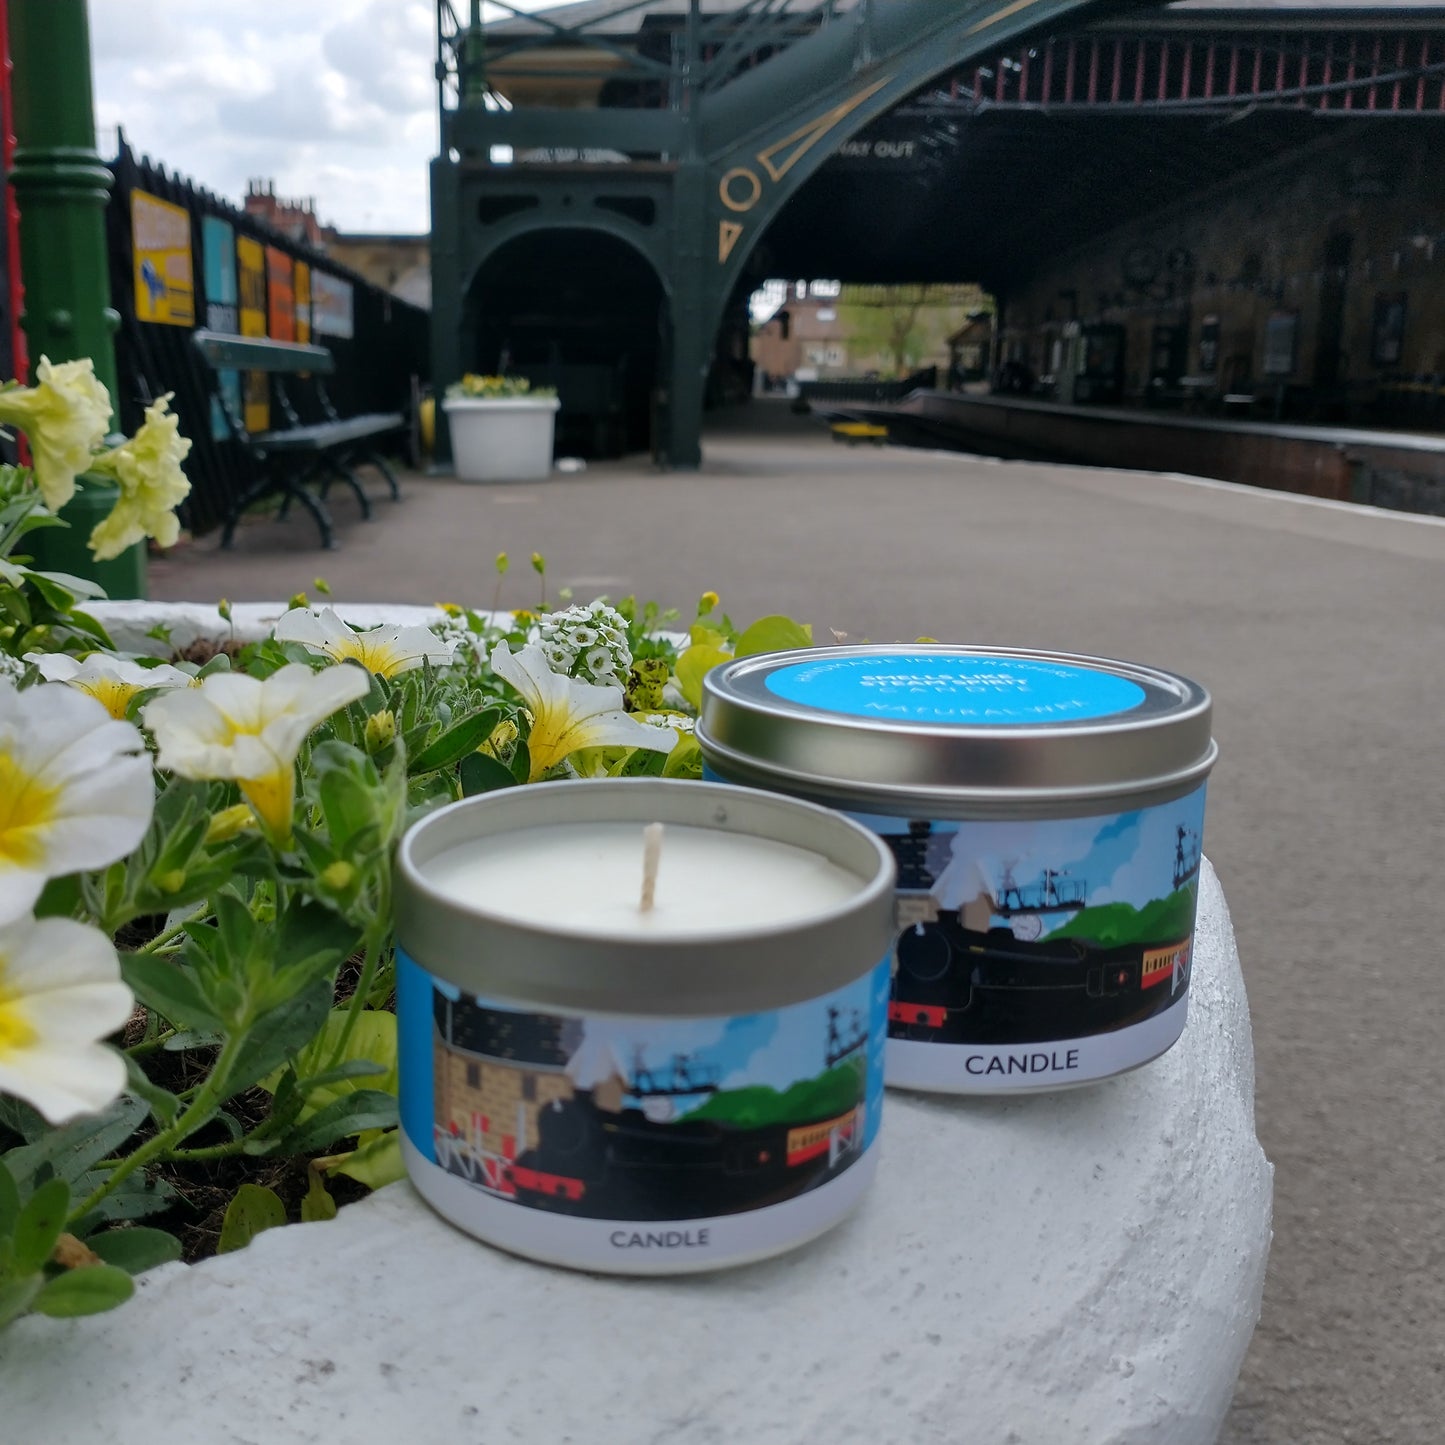 A couple of candles in tins looking lovely on the station Platform at Pickering.